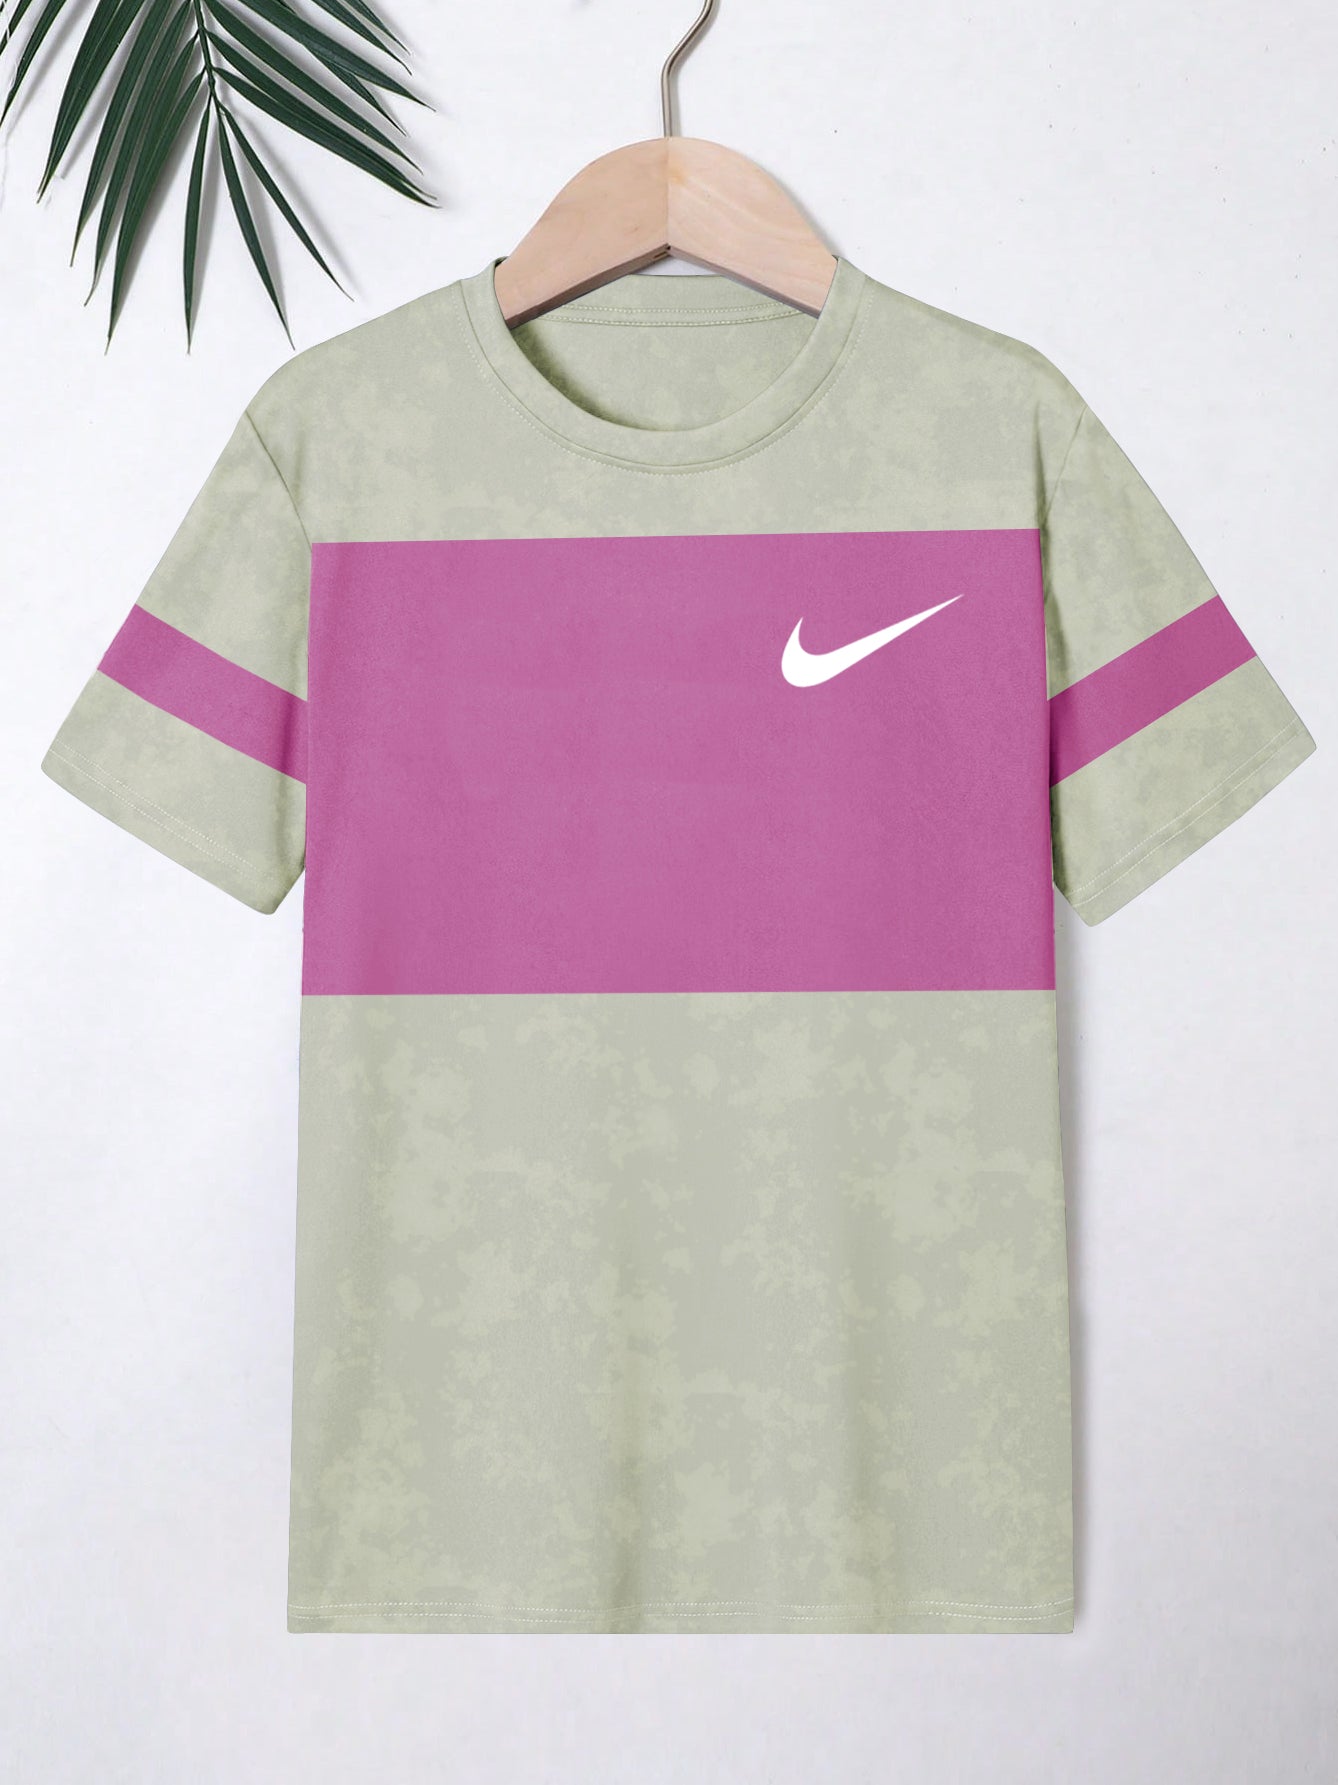 NK Crew Neck Single Jersey Tee Shirt For Kids-Grapes Faded with Pink Panel-BE1223